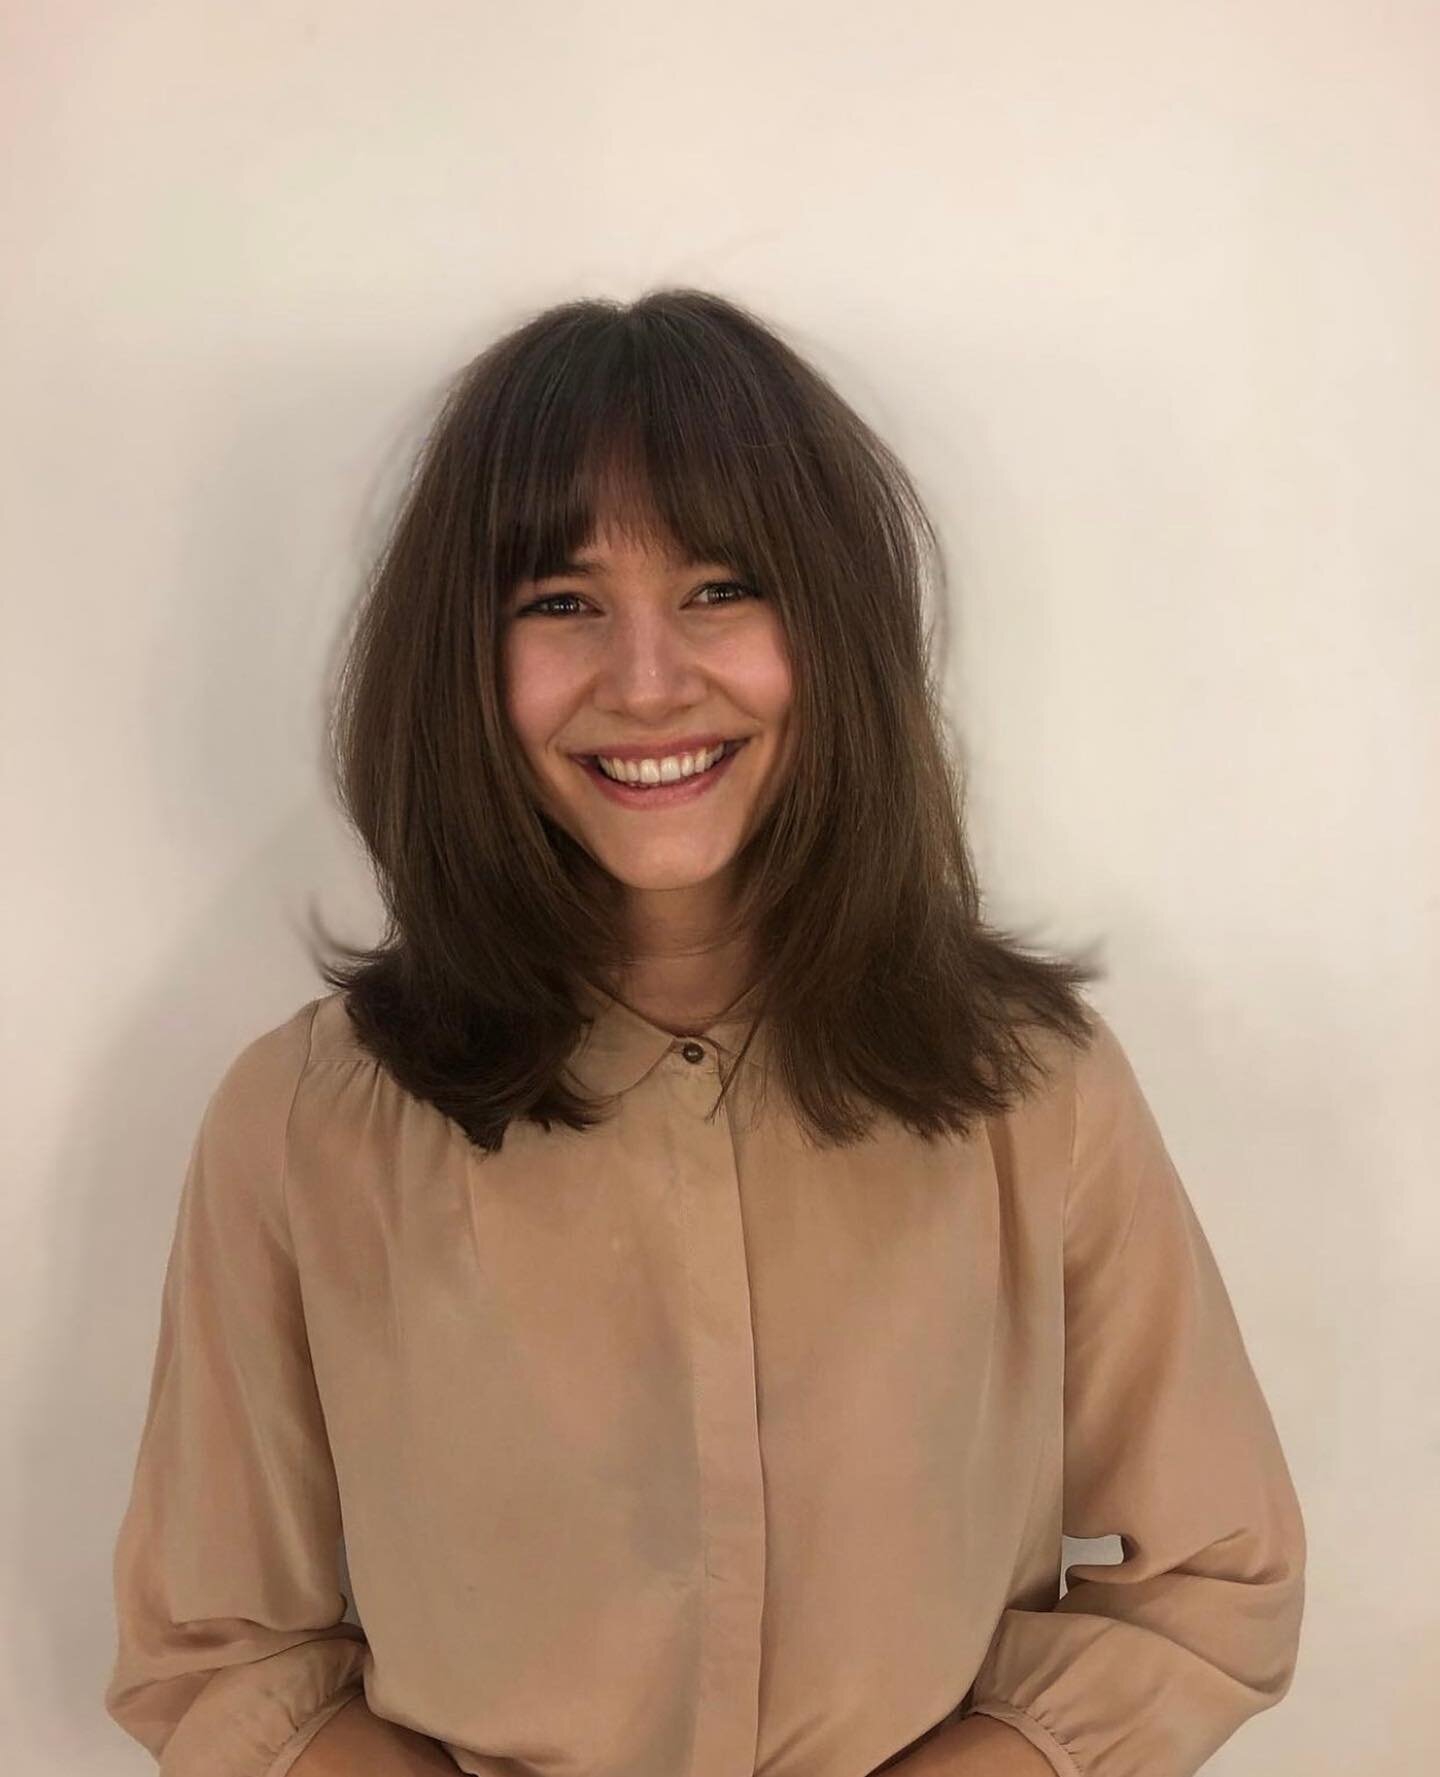 THIS IS YOUR SIGN TO GET BANGS!! ⁠🗣⁠
⁠
Check out this gorg cut Georgia did on her client and swipe left for the before! ⁠
⁠
Call 212-242-7786 to book! ⁠
⁠
#newhair #newhaircut #hairstylistlife #hairstylist #hairsalon #salonlife #hairtransformation #